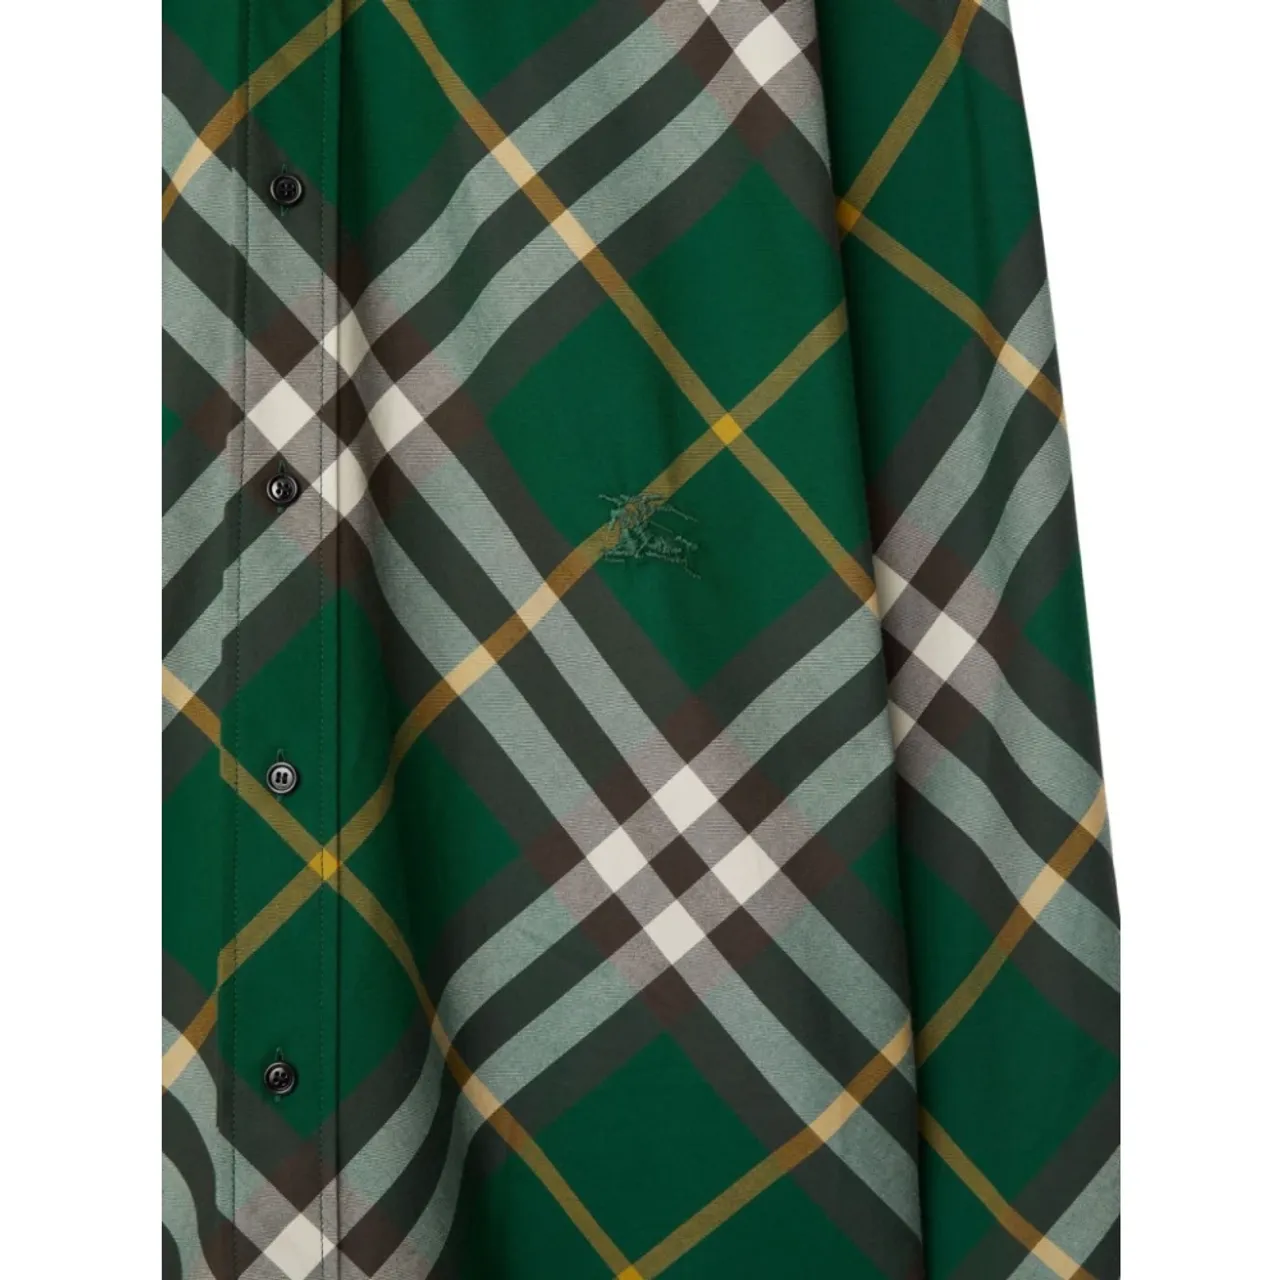 Burberry , Green Checkered Shirt with Embroidered Logo ,Green male, Sizes: